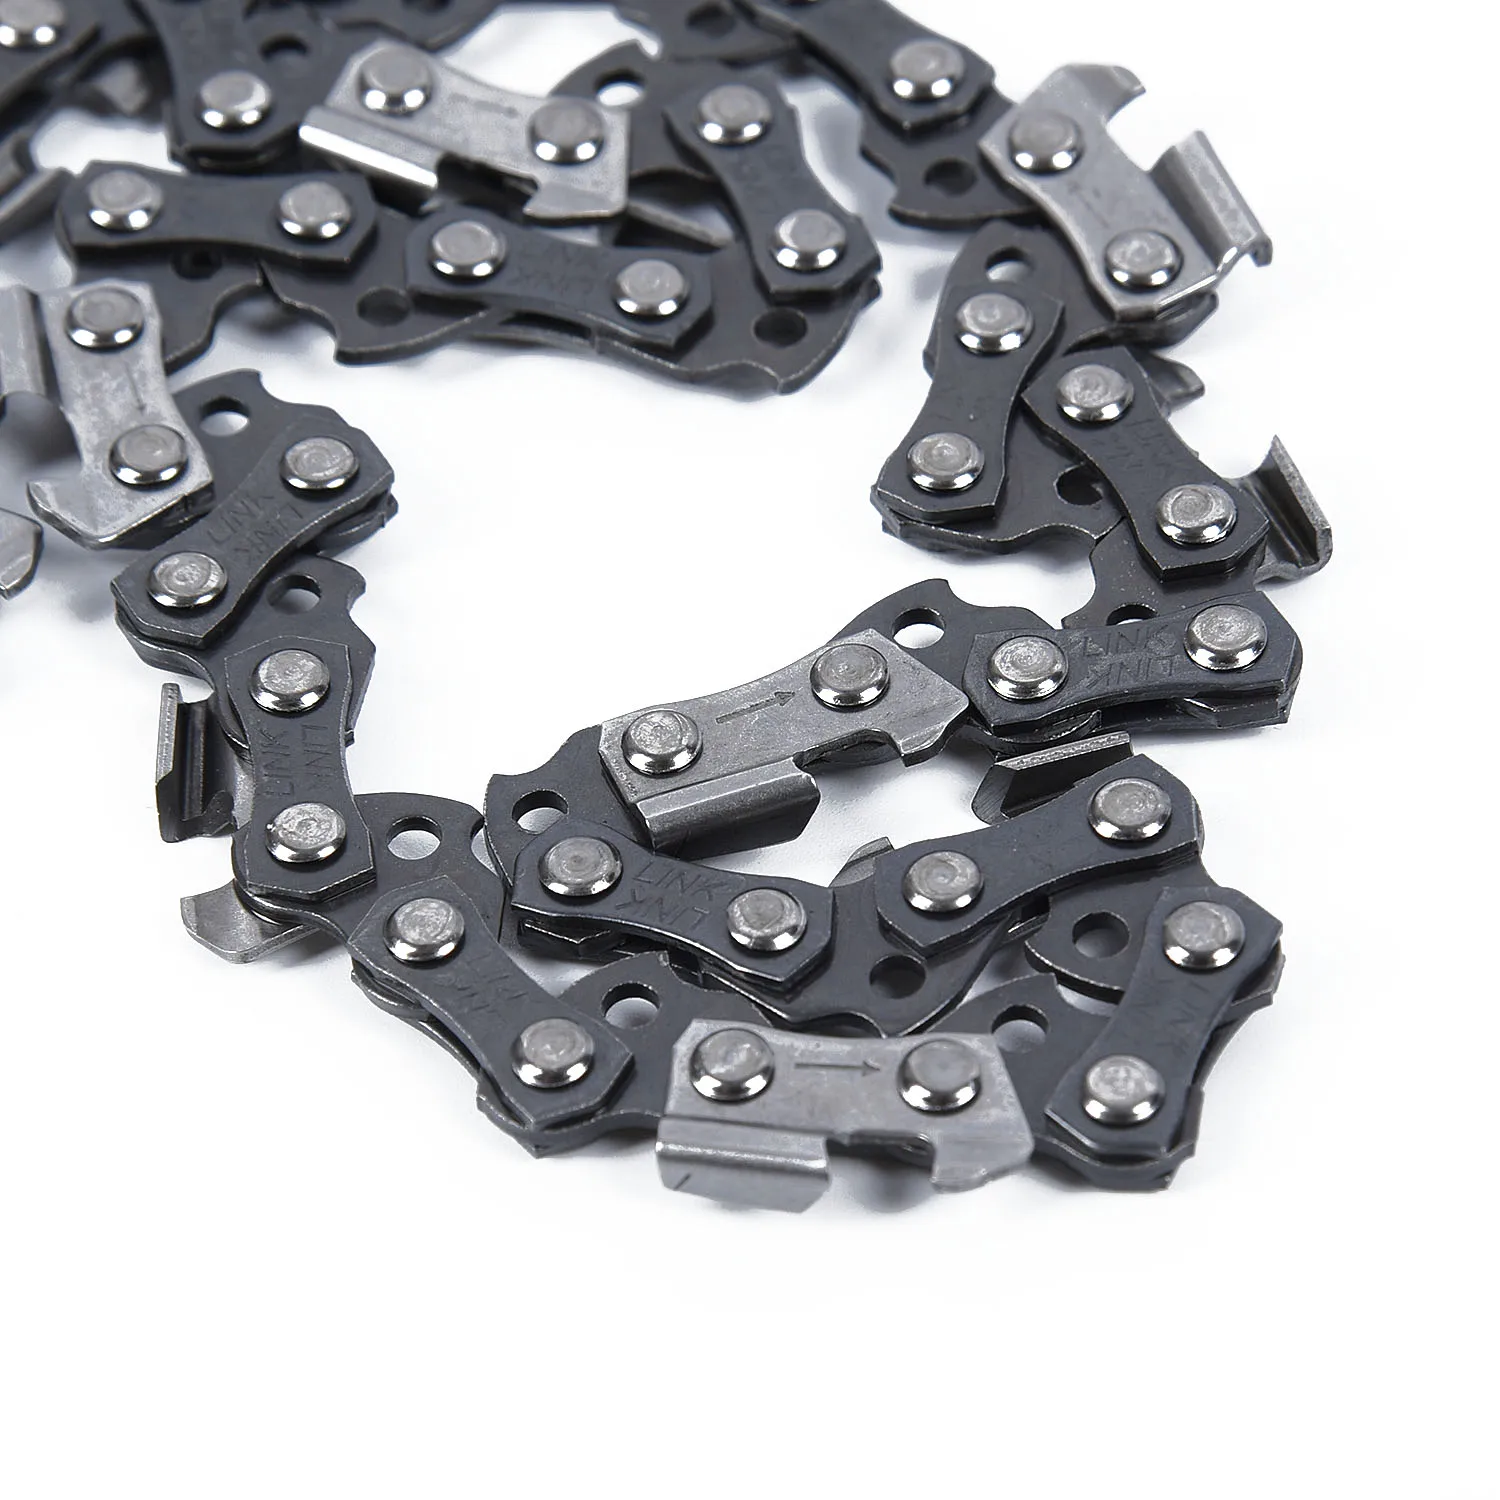 

009 010 017 019 023 3/8" .050 " 050 " 009 010 017 Chainsaw Chain 019 023 Replaces Accessories Metal 50 DL 50 Drive Links